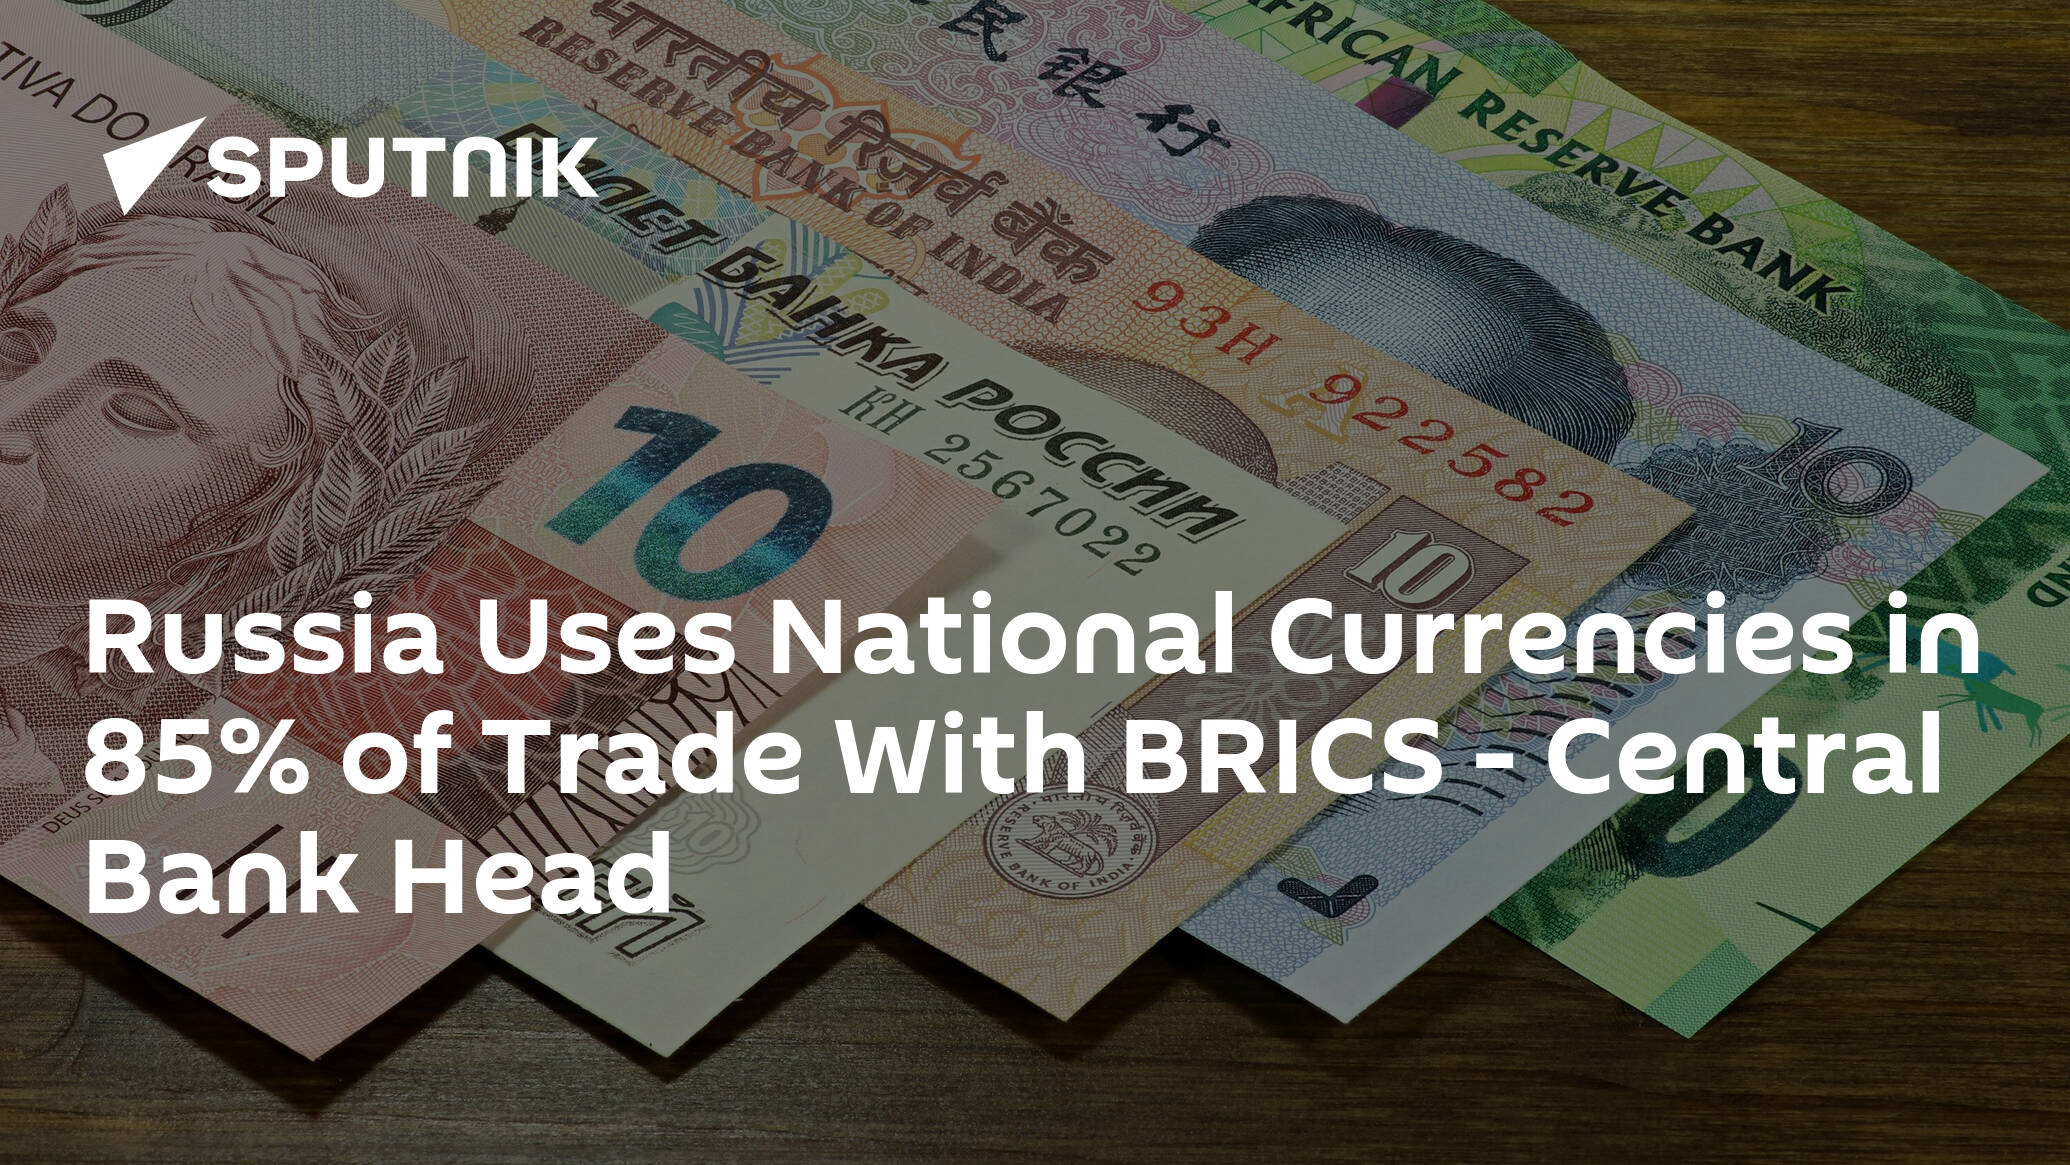 Russia Uses National Currencies in 85% of Trade With BRICS – Central Bank Head